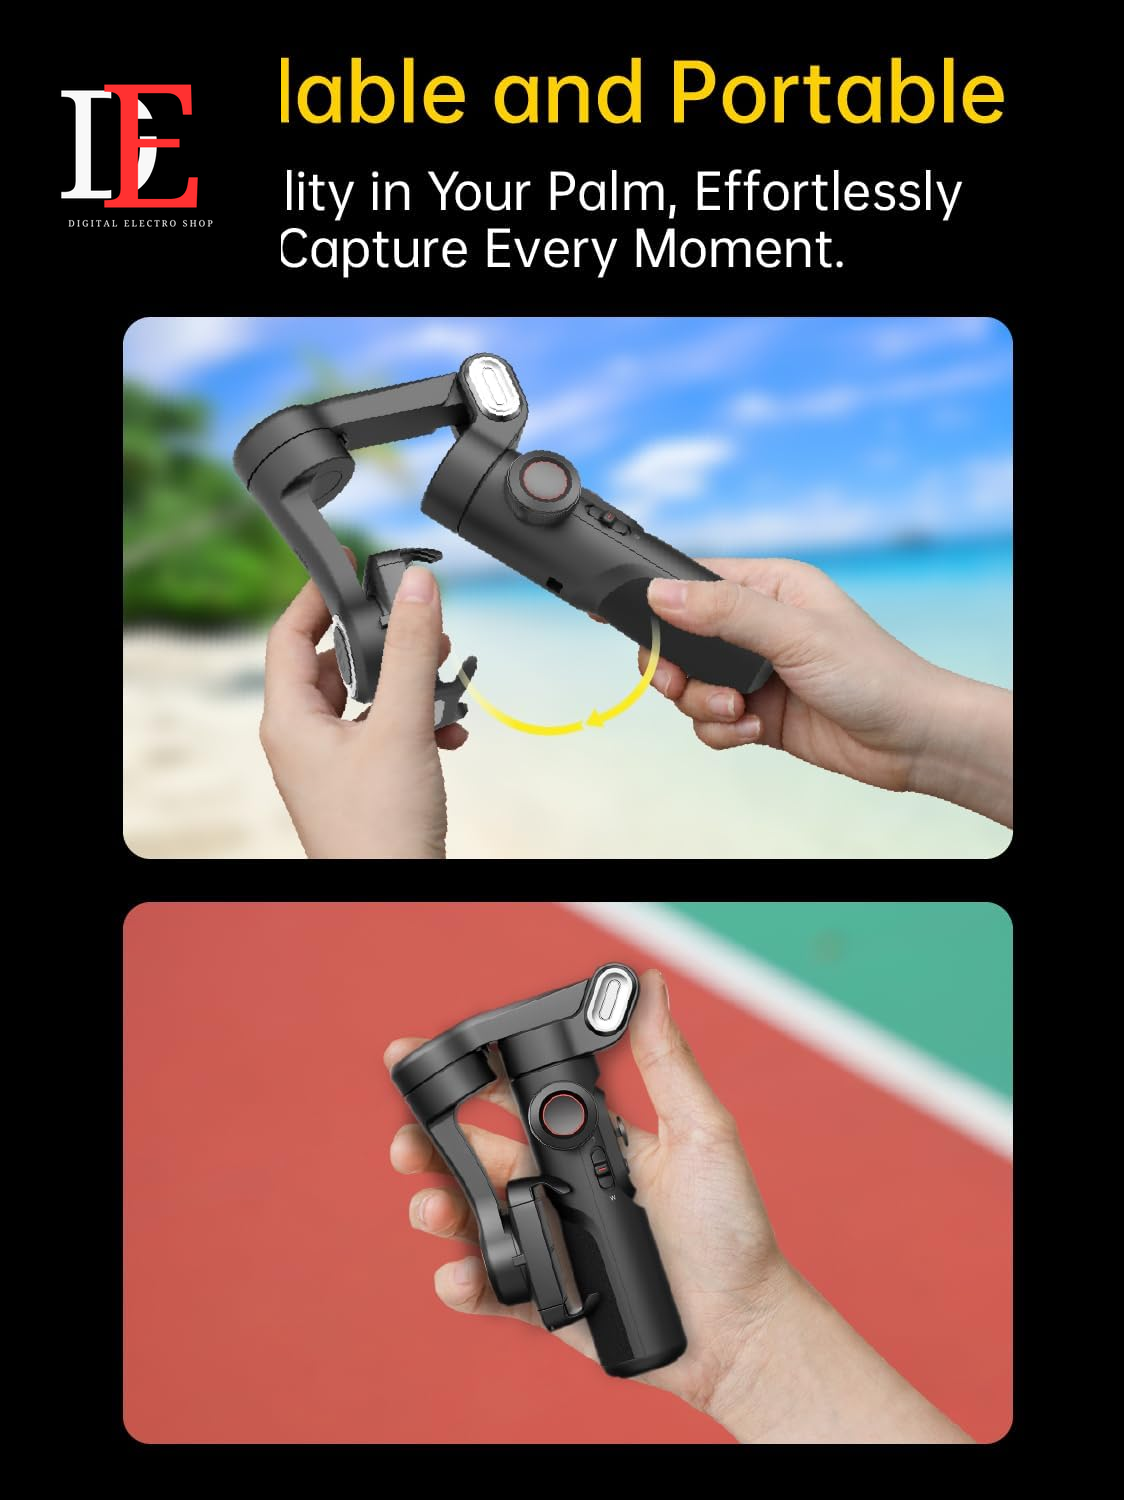 Smartphone Gimbal Stabilizer with RGB Magnetic Fill Light, Face Tracking, and Foldable Design - Compatible with iPhone and Android for Vlog Recording"